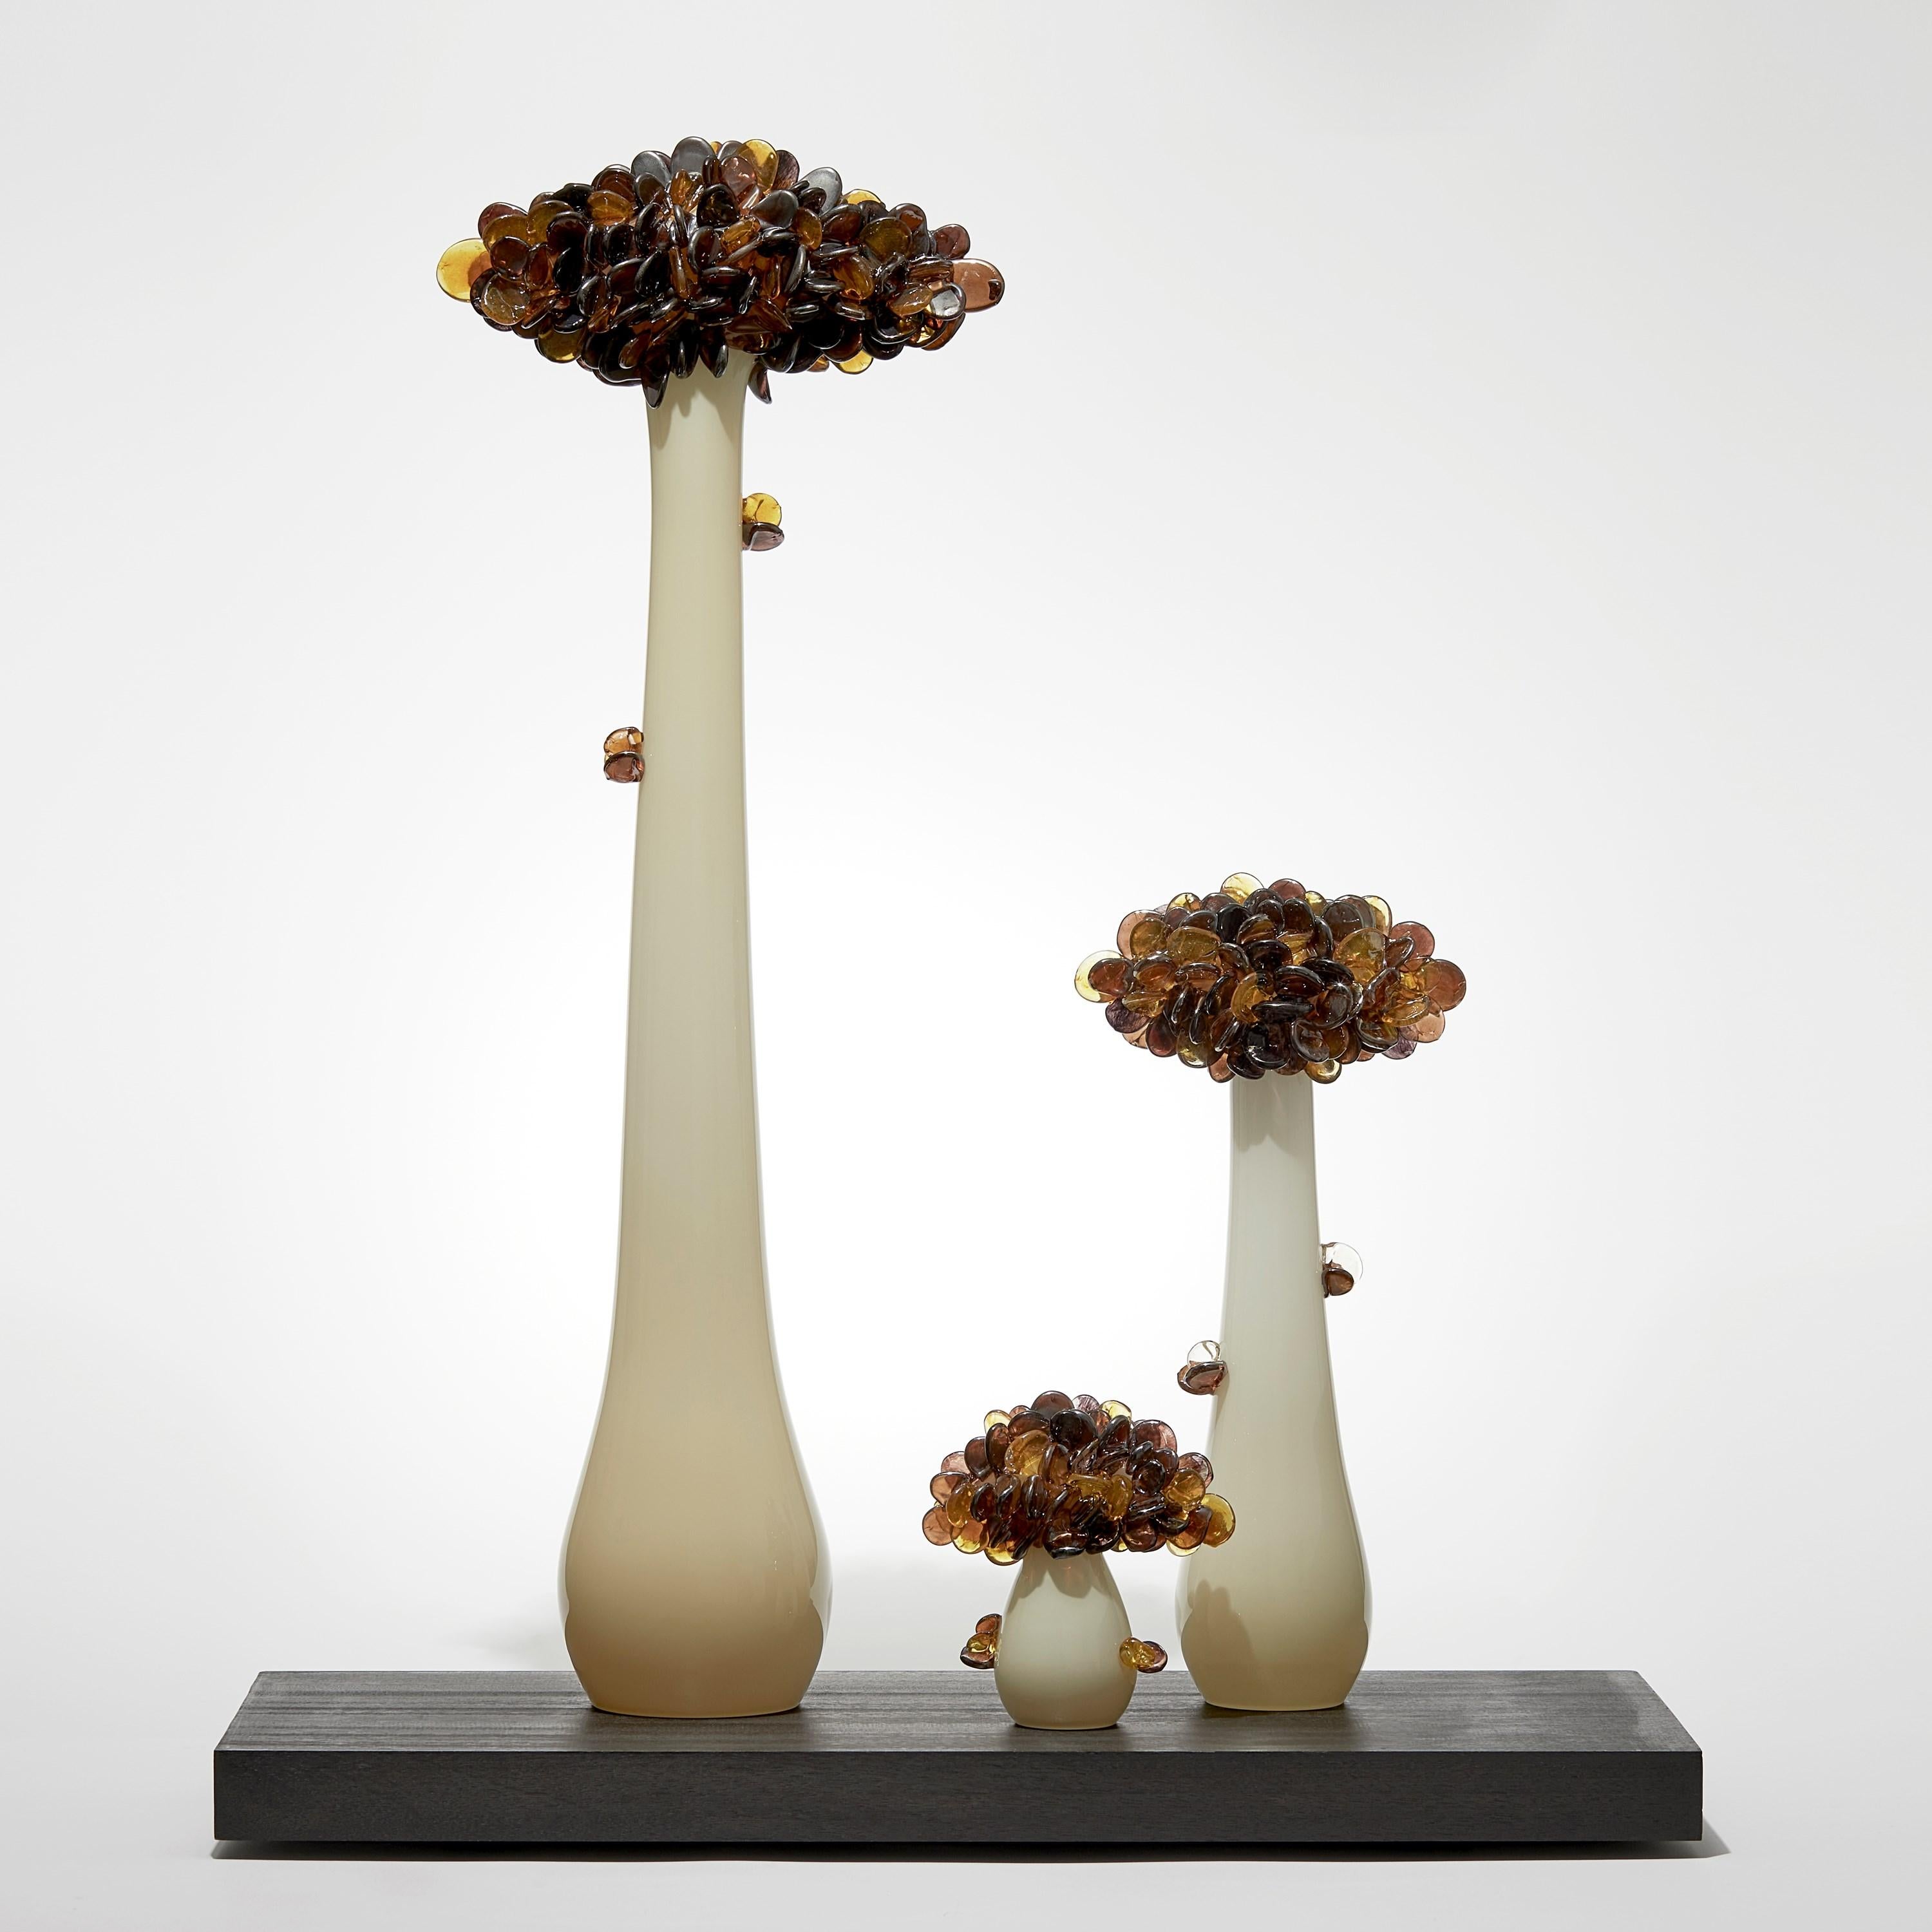 'Enchanted Mori Twilight' is a unique sculpted glass installation by the British artist, Louis Thompson.

Thompson's Enchanted Mori are inspired by the practice of bonsai, echoing its artistic intention to create a higher level of aesthetic